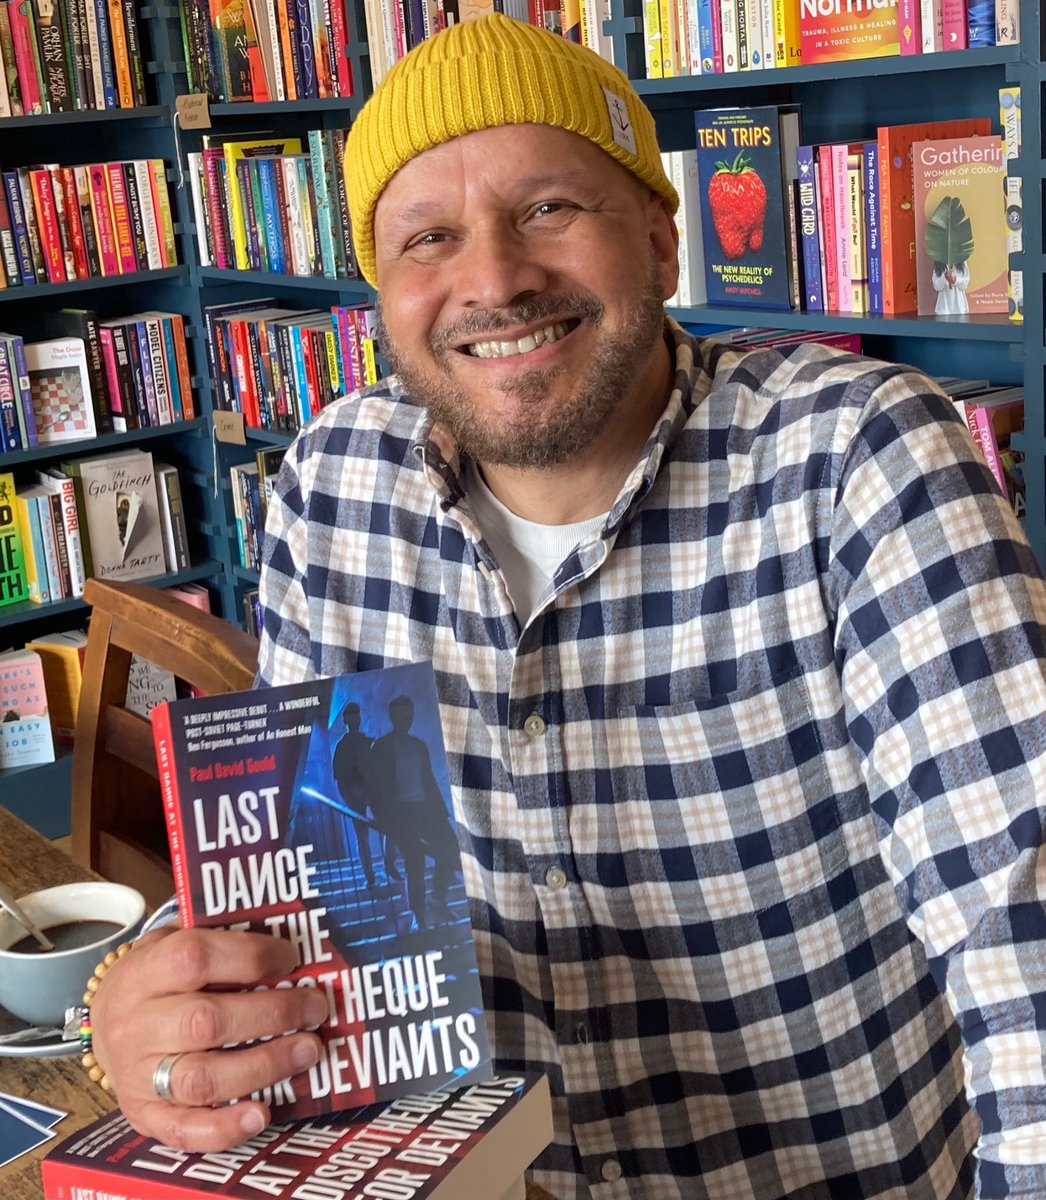 Called in @theheathbookshop, #Birmingham to sign copies of my #Russian #antiwar pre-#Putin LGBT thriller ‘Last Dance’, pub’d @unbounders Am en route to talk #Russia & #creative writing *TODAY* at my alma mater @unibirmingham